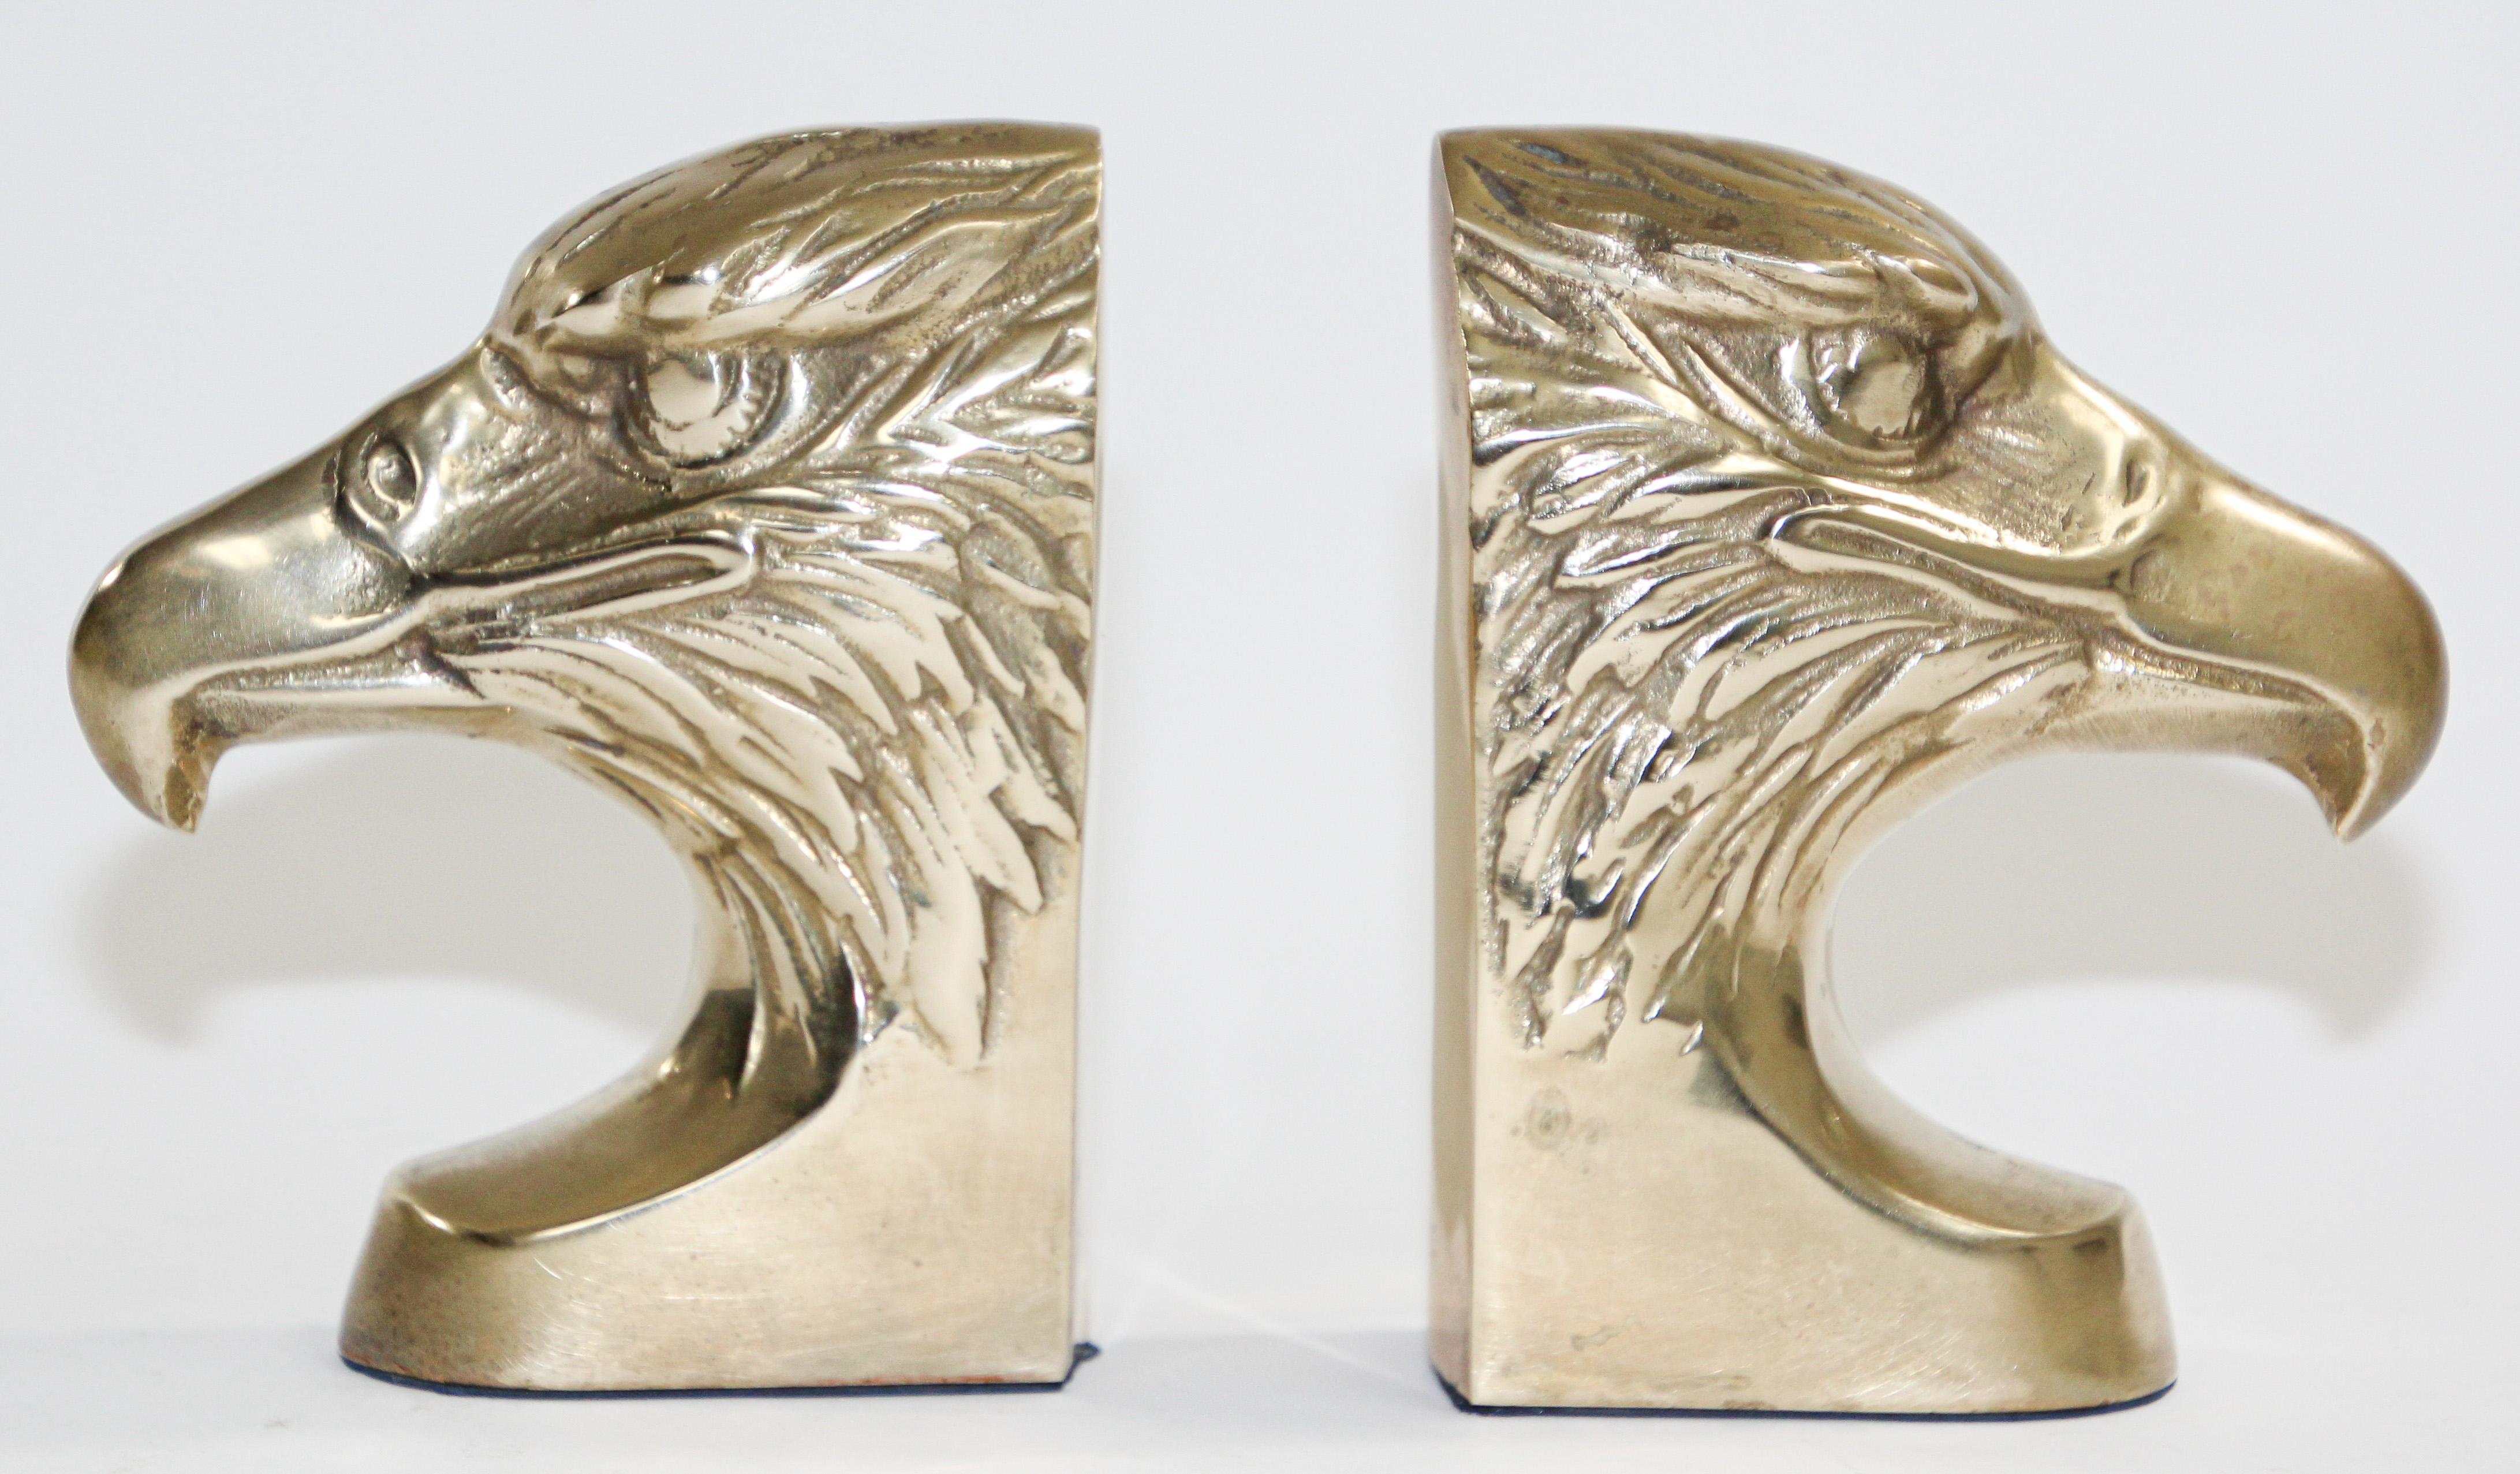 Set of vintage Mid-Century Modern cast metal brass patriotic bald eagle head sculpture bookends.
Pair of solid polished brass eagle heads that have a wonderful Early American class - Federal 